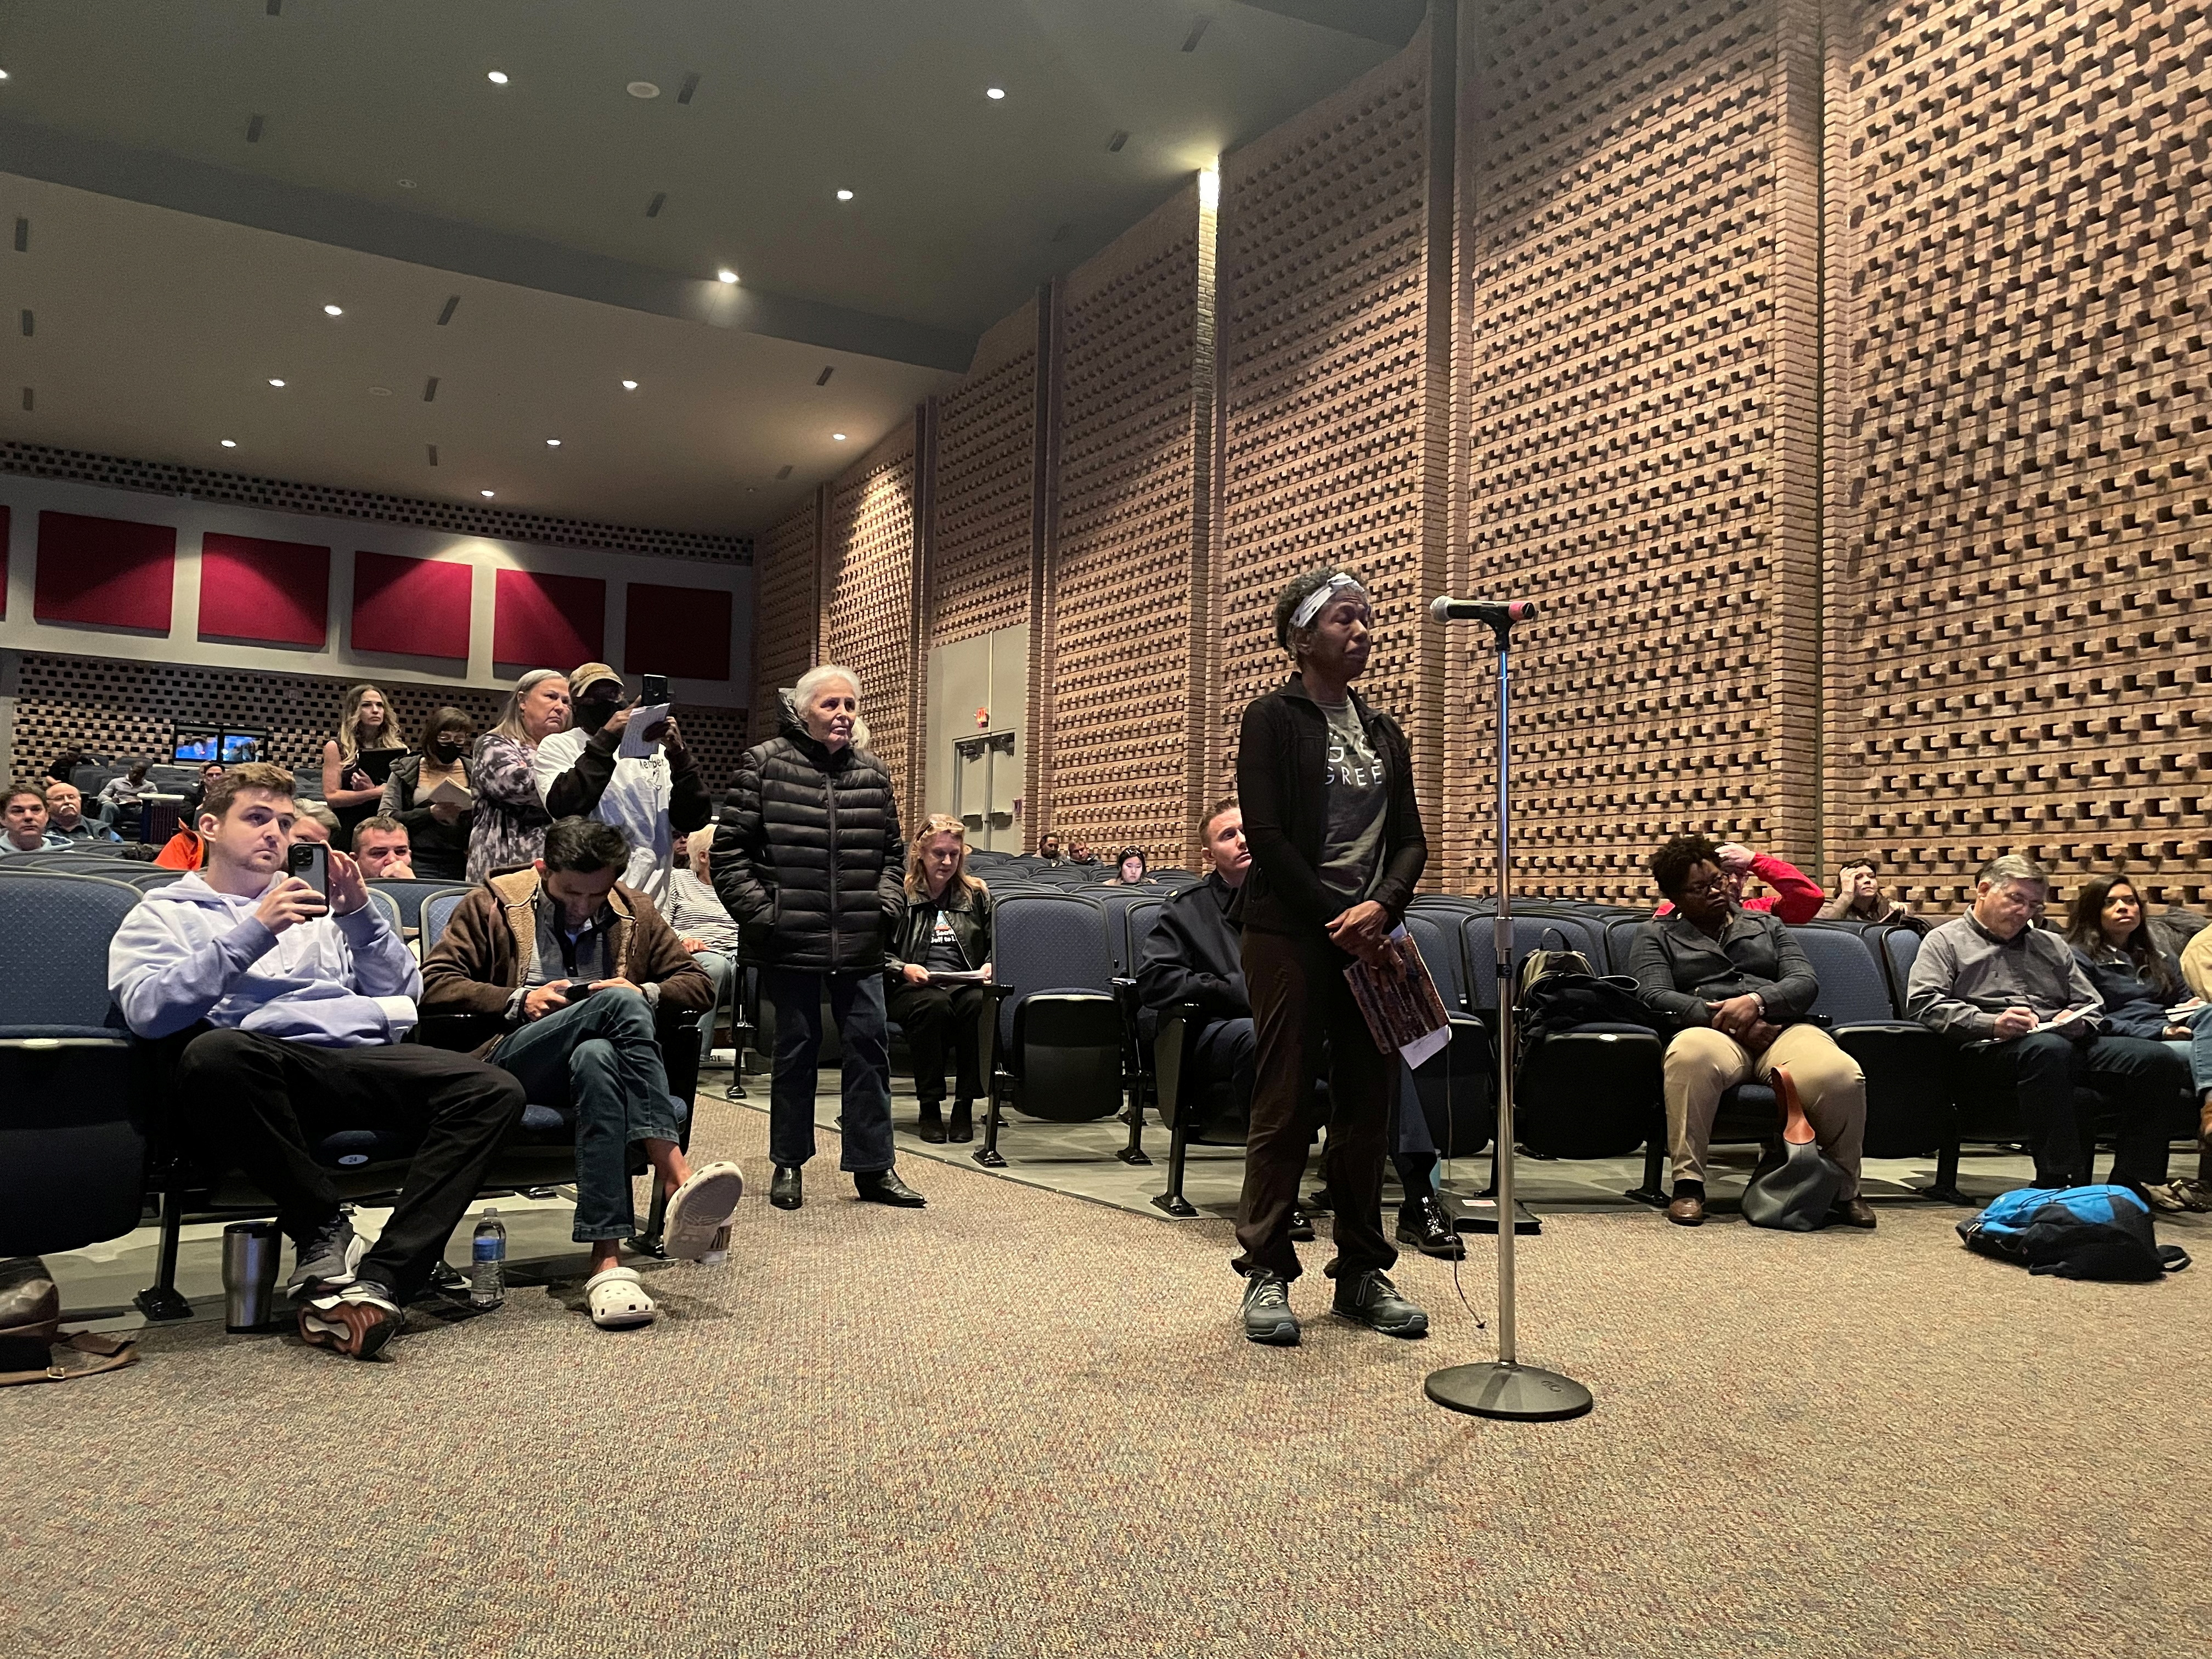 Residents line up to question U.S. energy and safety regulators during a meeting to review plans to restart the Freeport LNG gas-export facility idled by fire last year in Freeport, Texas